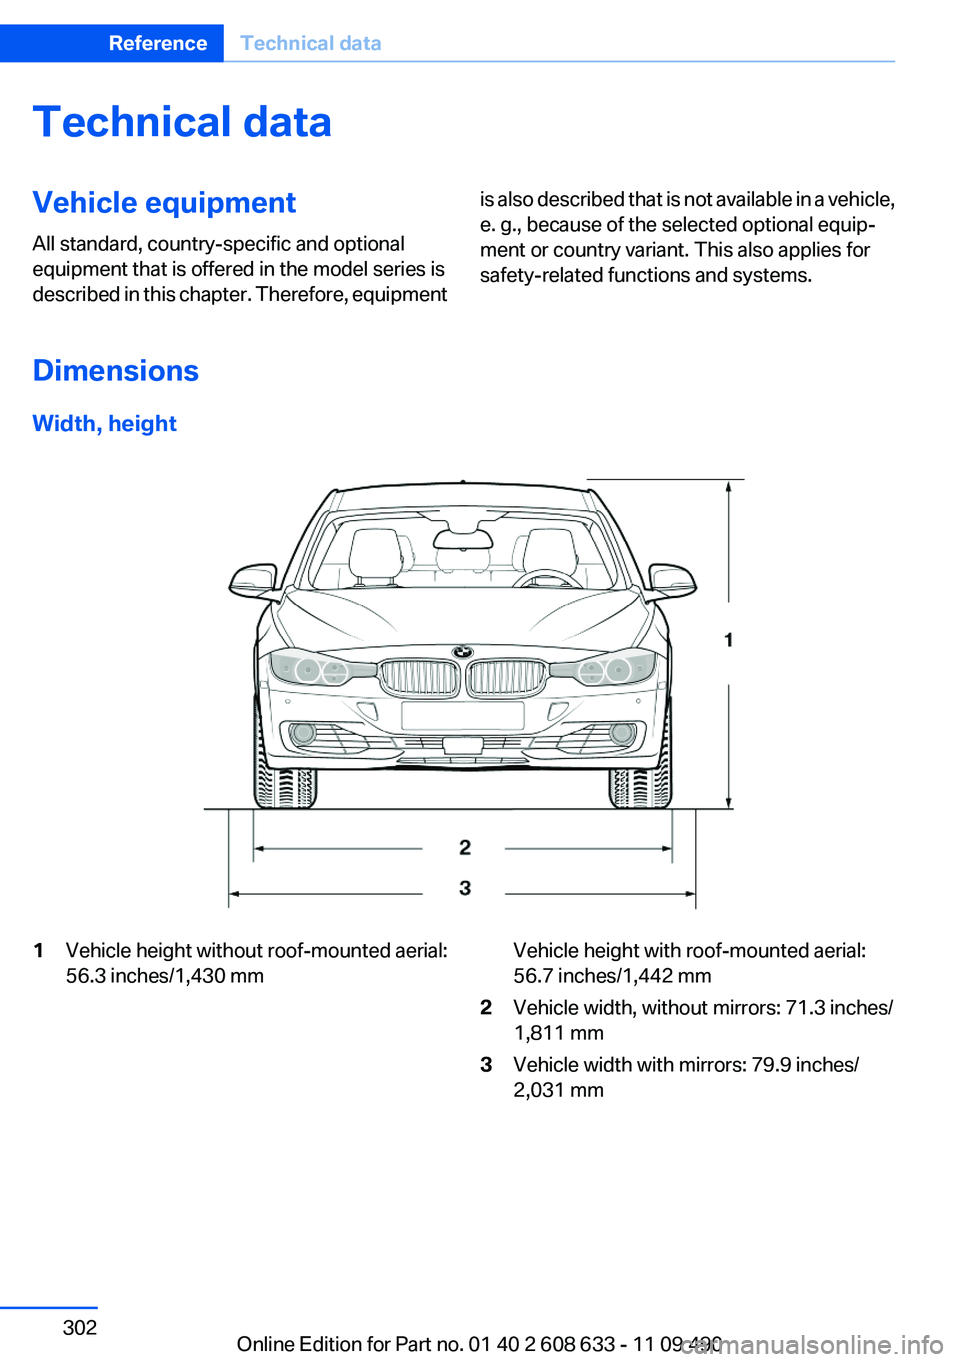 BMW 335I 2012  Owners Manual Technical dataVehicle equipment
All standard, country-specific and optional
equipment that is offered in the model series is
described in this chapter. Therefore, equipmentis also described that is no